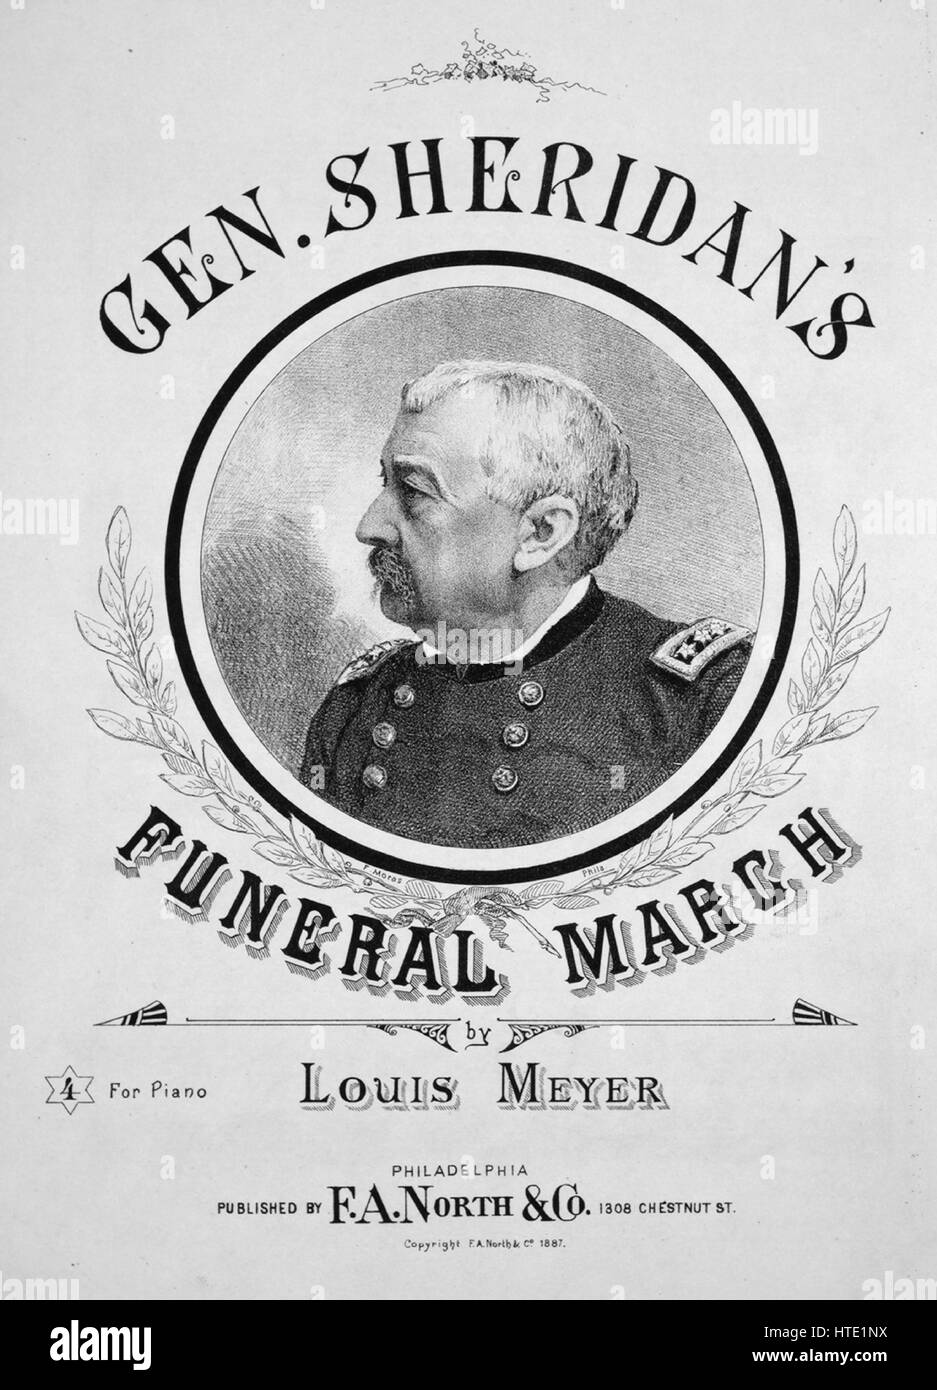 Sheet music cover image of the song 'Gen Sheridan's Funeral March', with original authorship notes reading 'By Louis Meyer', United States, 1888. The publisher is listed as 'F.A. North and Co., 1308 Chestnut St.', the form of composition is 'sectional', the instrumentation is 'piano', the first line reads 'None', and the illustration artist is listed as 'F. Moras'. Stock Photo